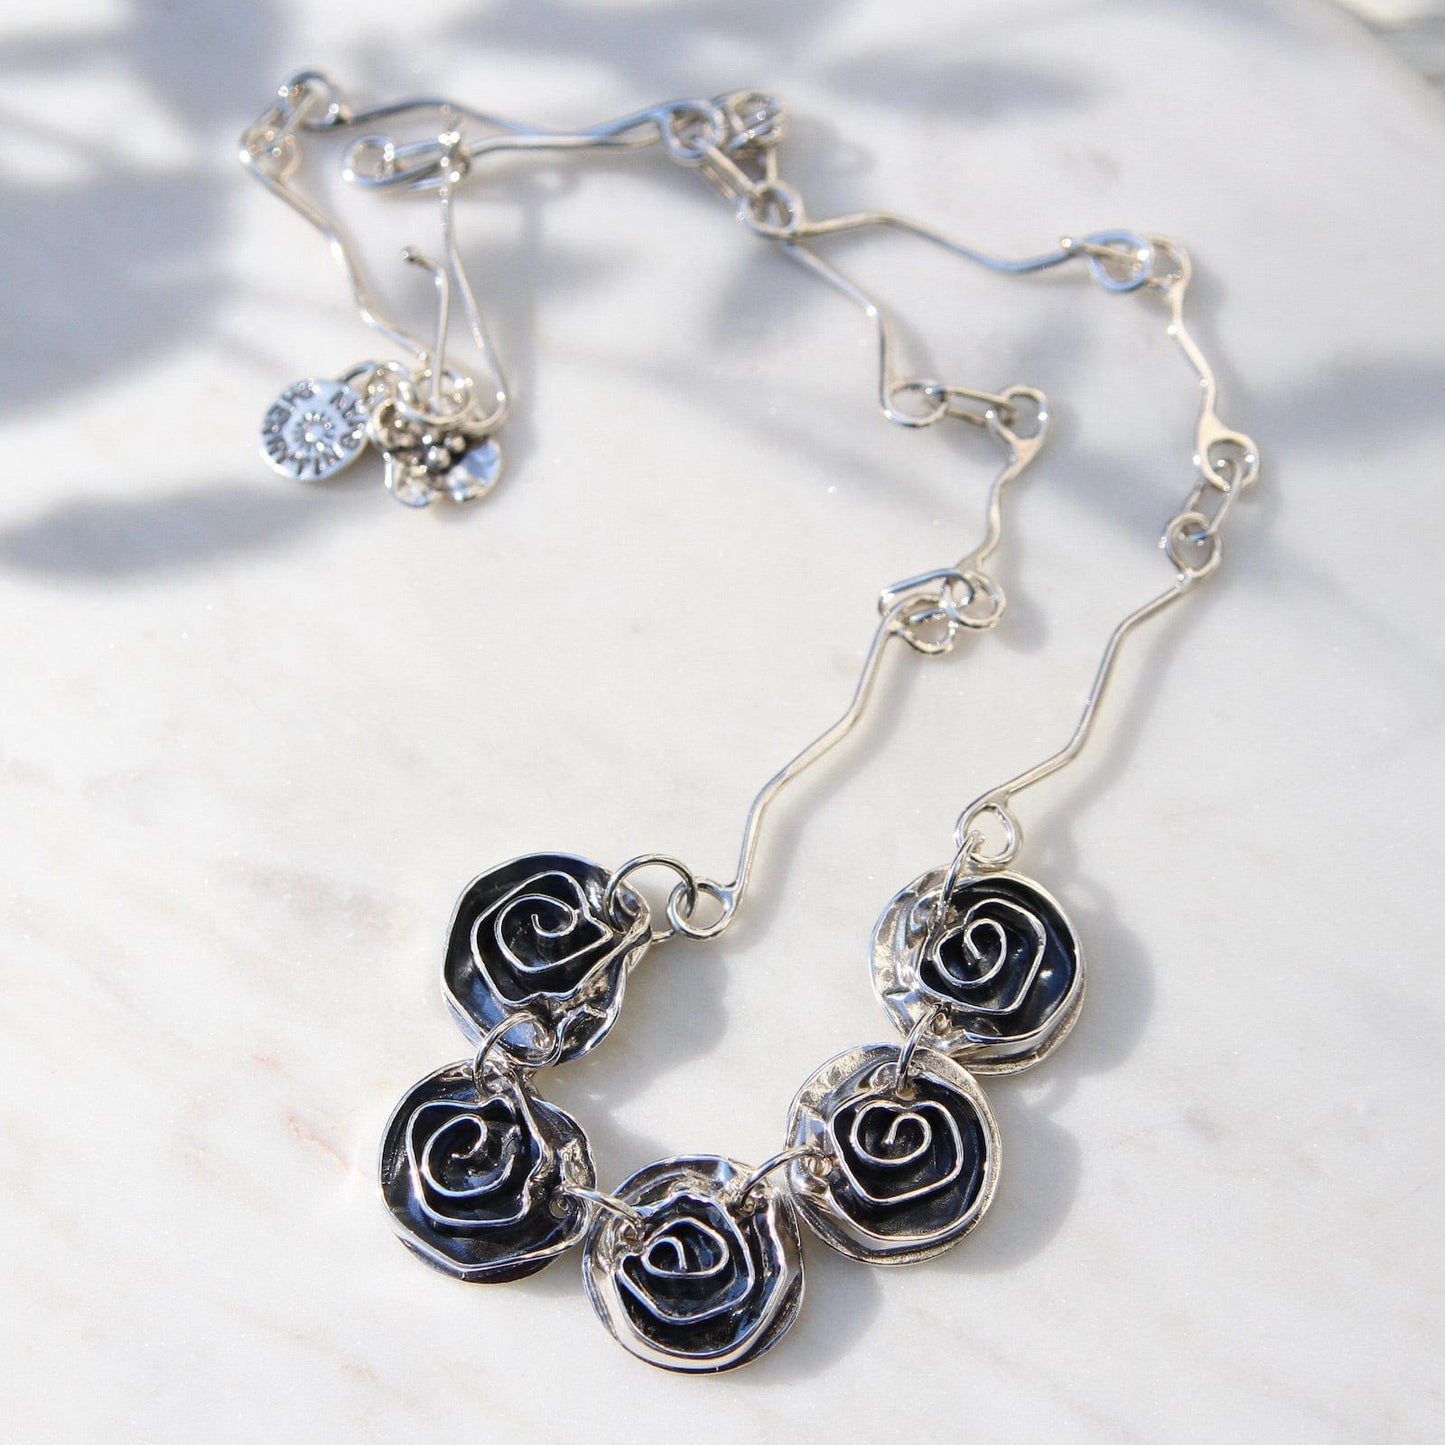 NKL 5 Roses on Signature Chain Necklace